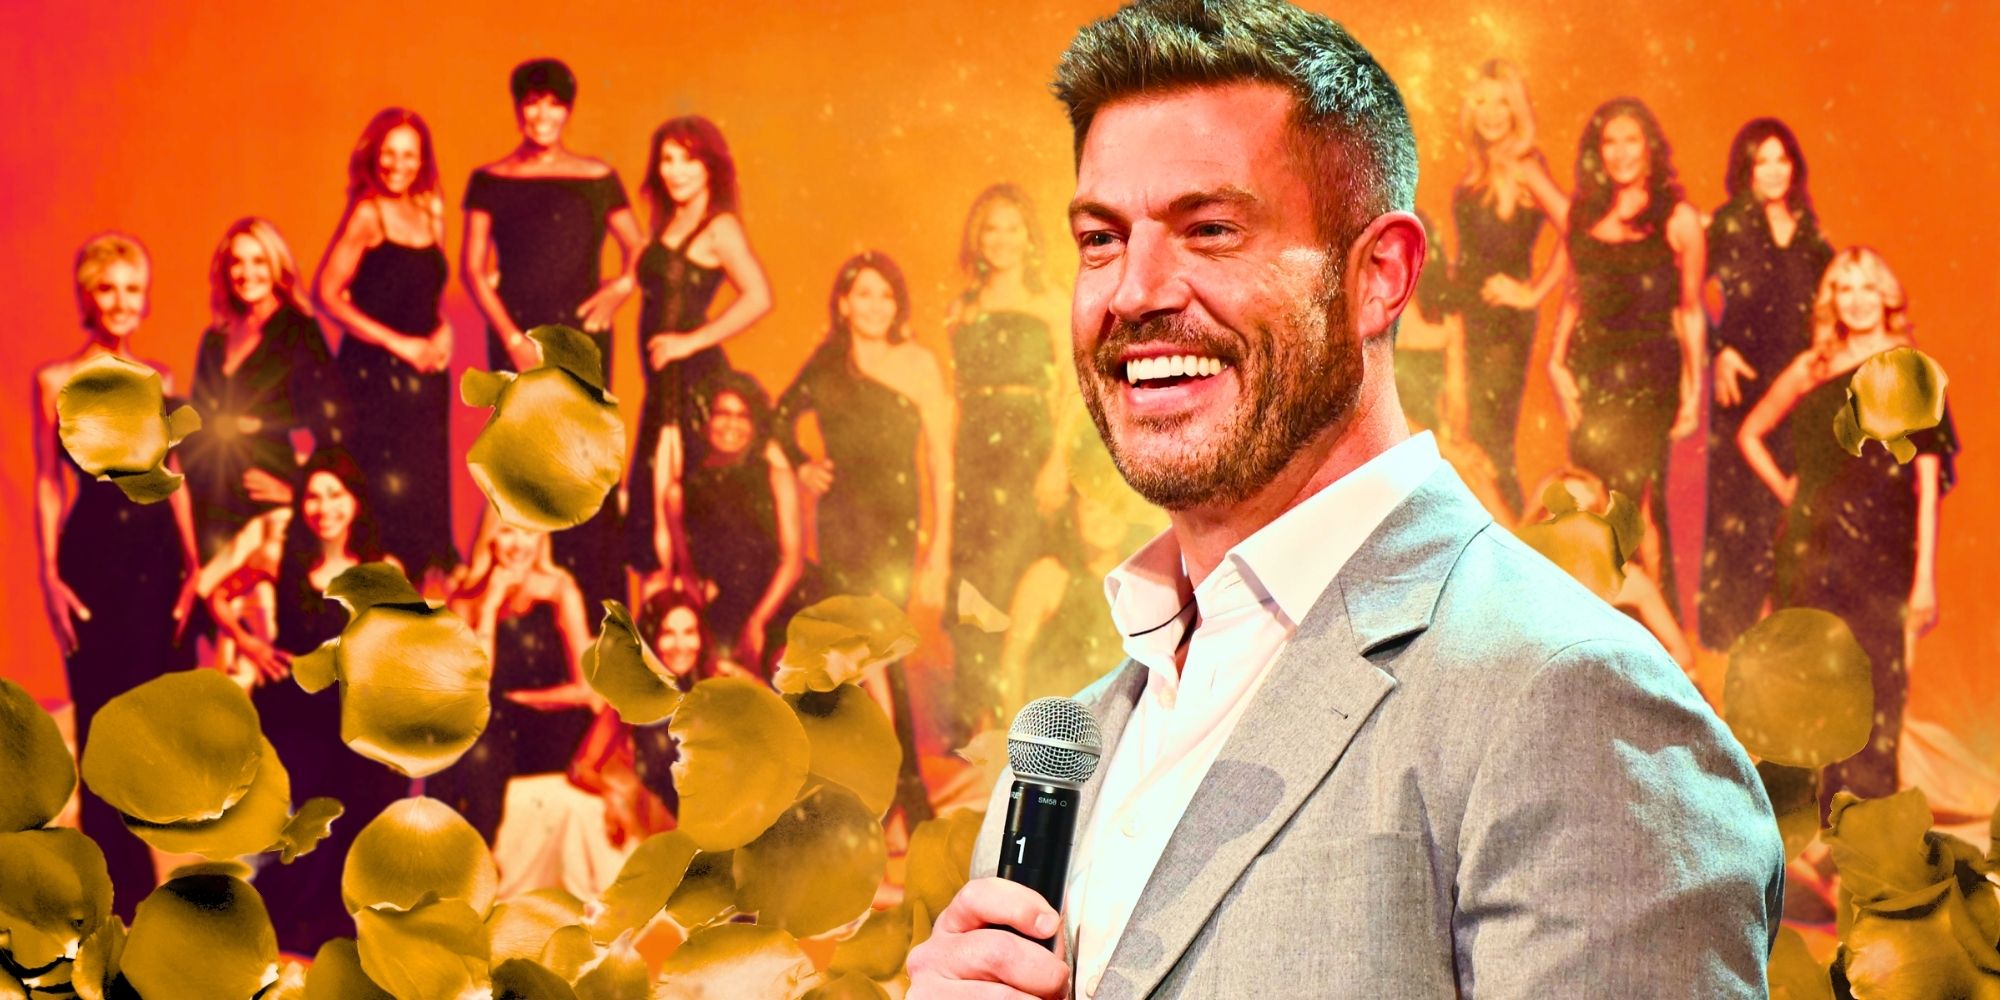 The Bachelor host Jesse Palmer, with The Golden Bachelorette women behind him